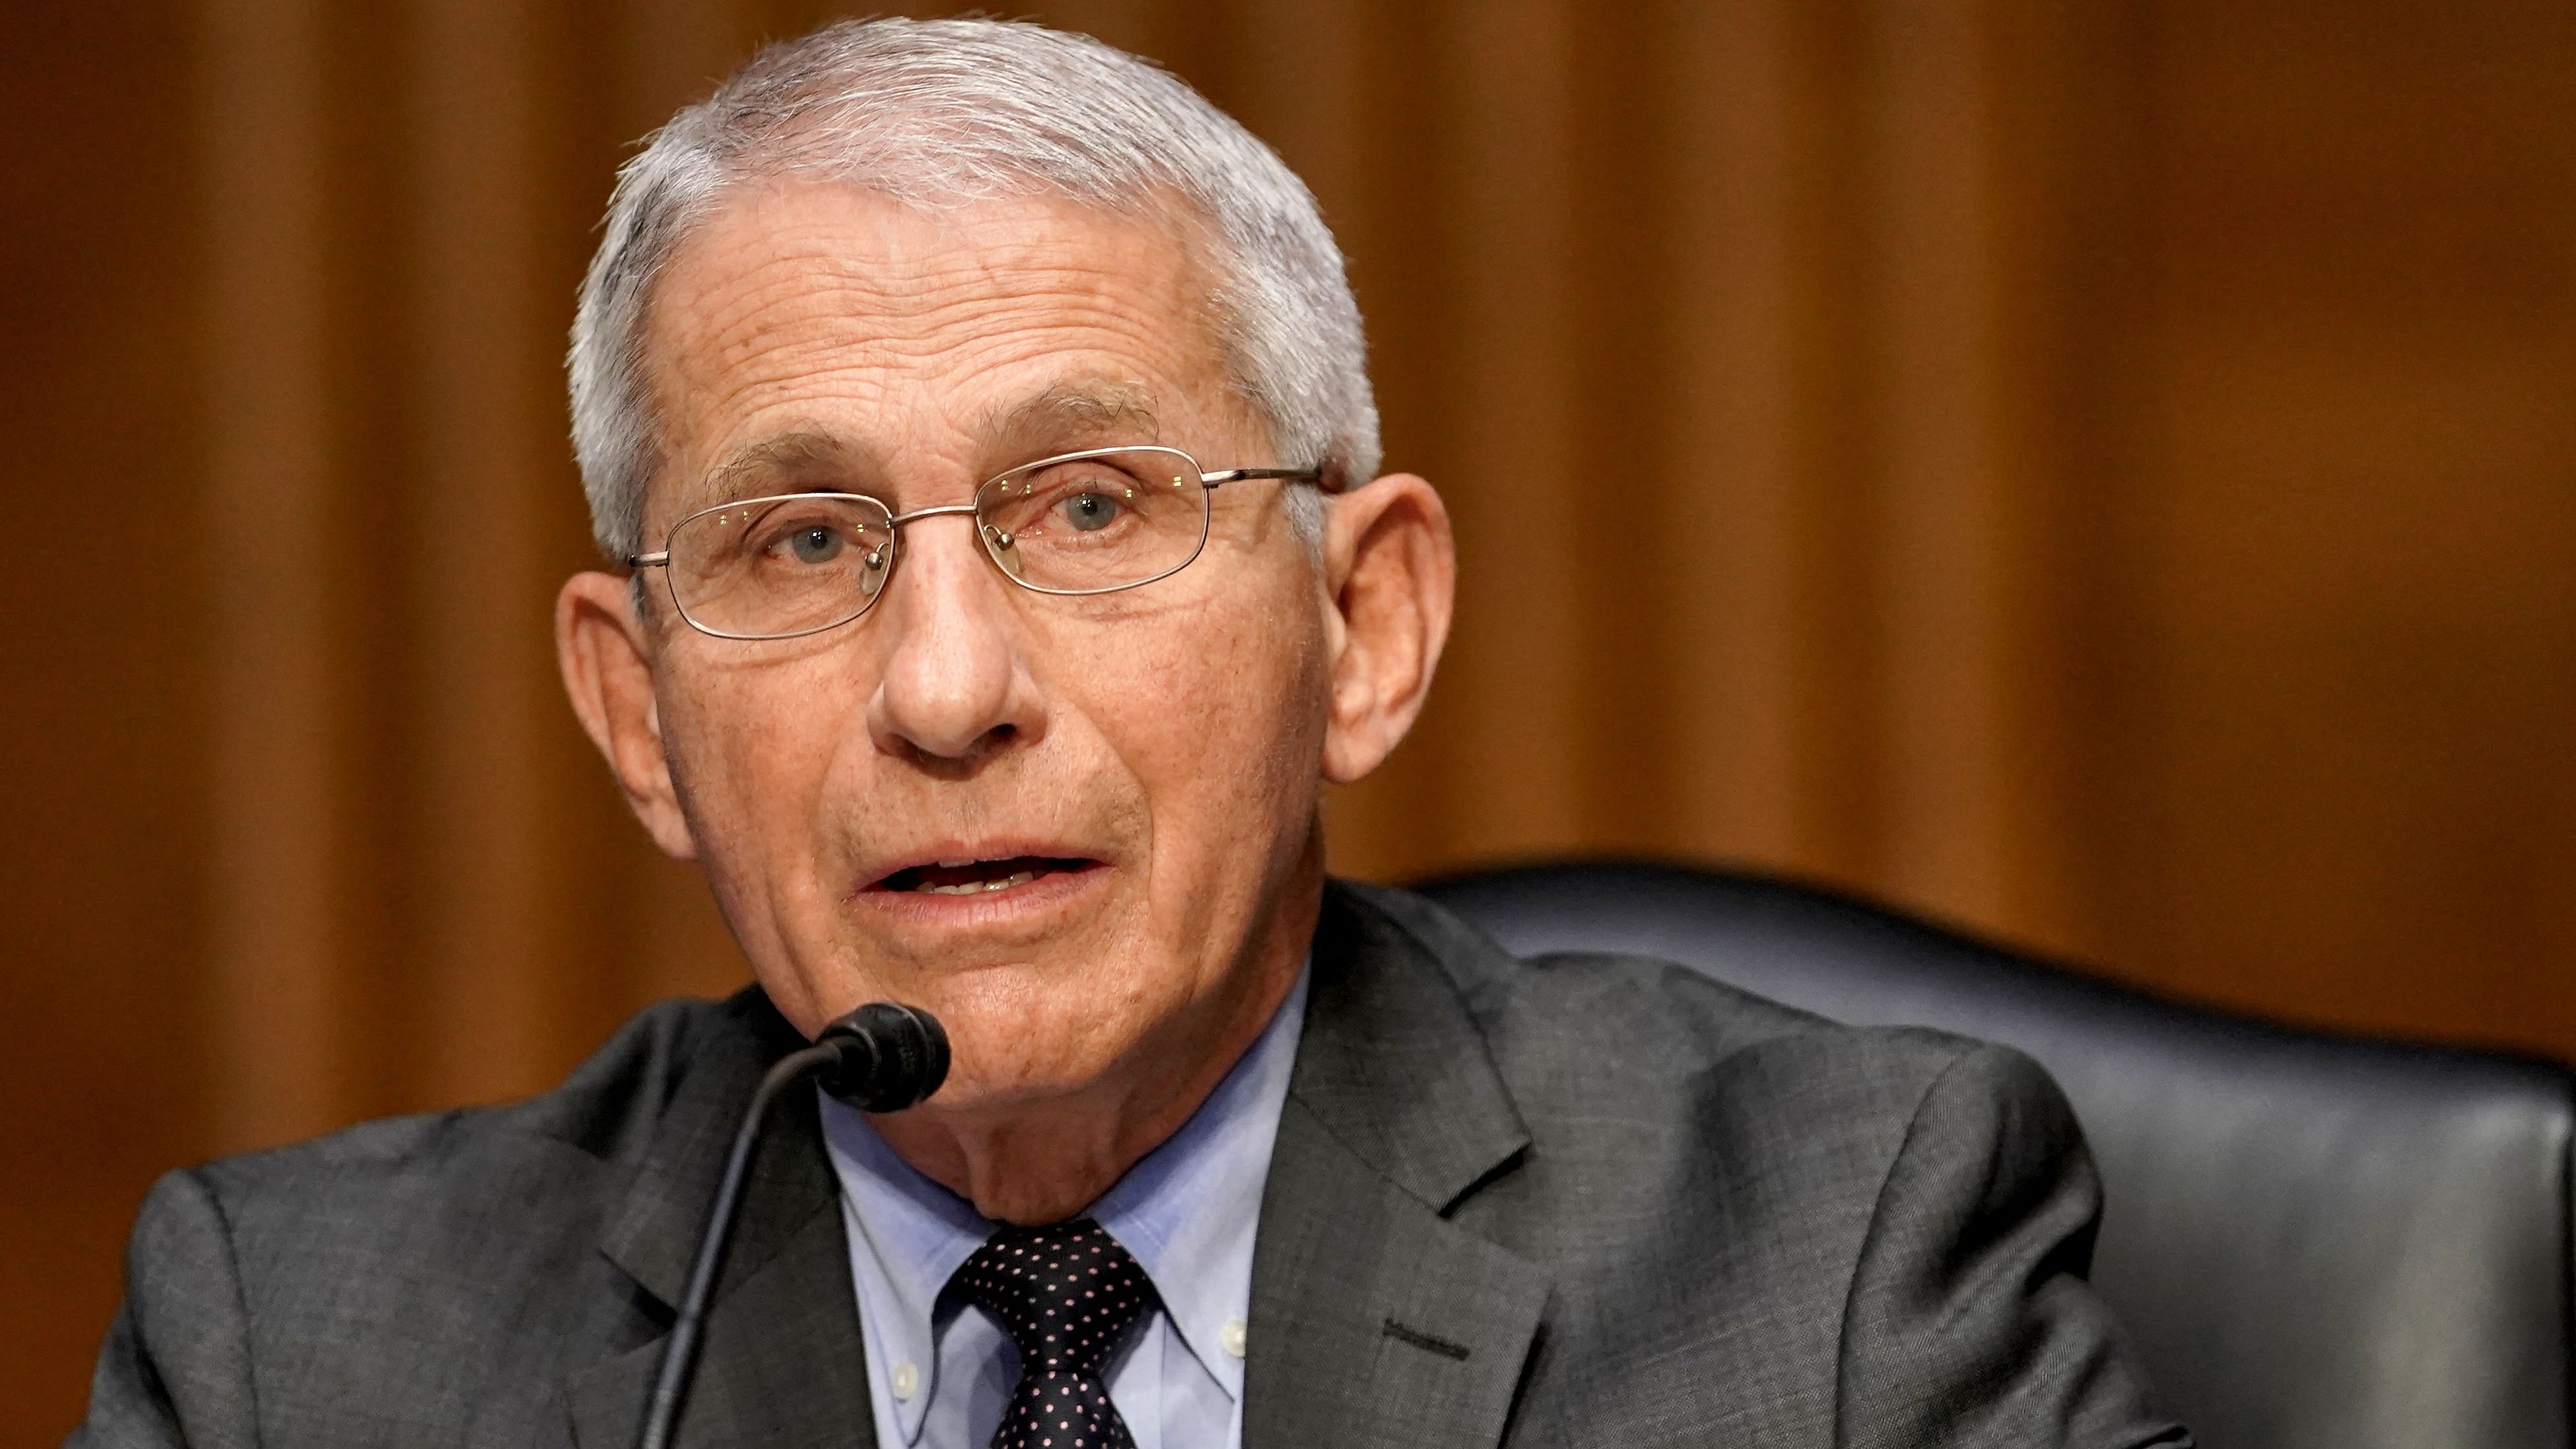 Dr Anthony Fauci. Credit: AFP Photo